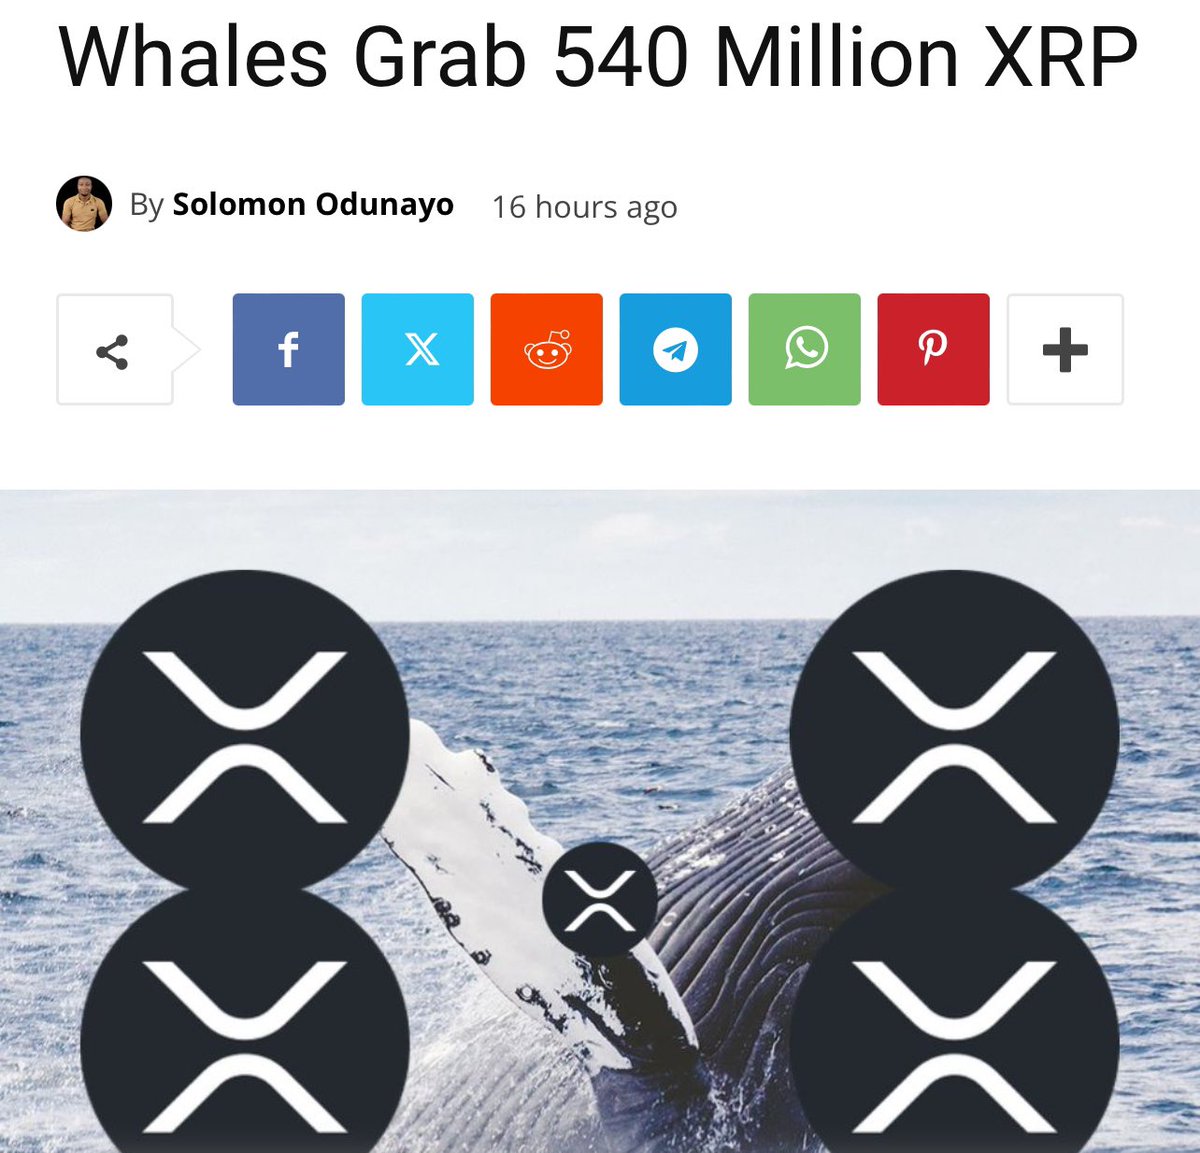 🚨 540M #XRP BOUGHT BY WHALES in the PAST HOURS THIS ALSO COMES SHORTLY AFTER TRADING VIEW RELEASES XRP PRICE PREDICTION $18.23 PER TOKEN!

CTF TOKEN, THE TOP TOKEN ON XRPL COULD BE LOOKING AT A SURGE FROM 0.97XRP to 374.25XRP per token!

Not only is @TokenCTF the top defi token